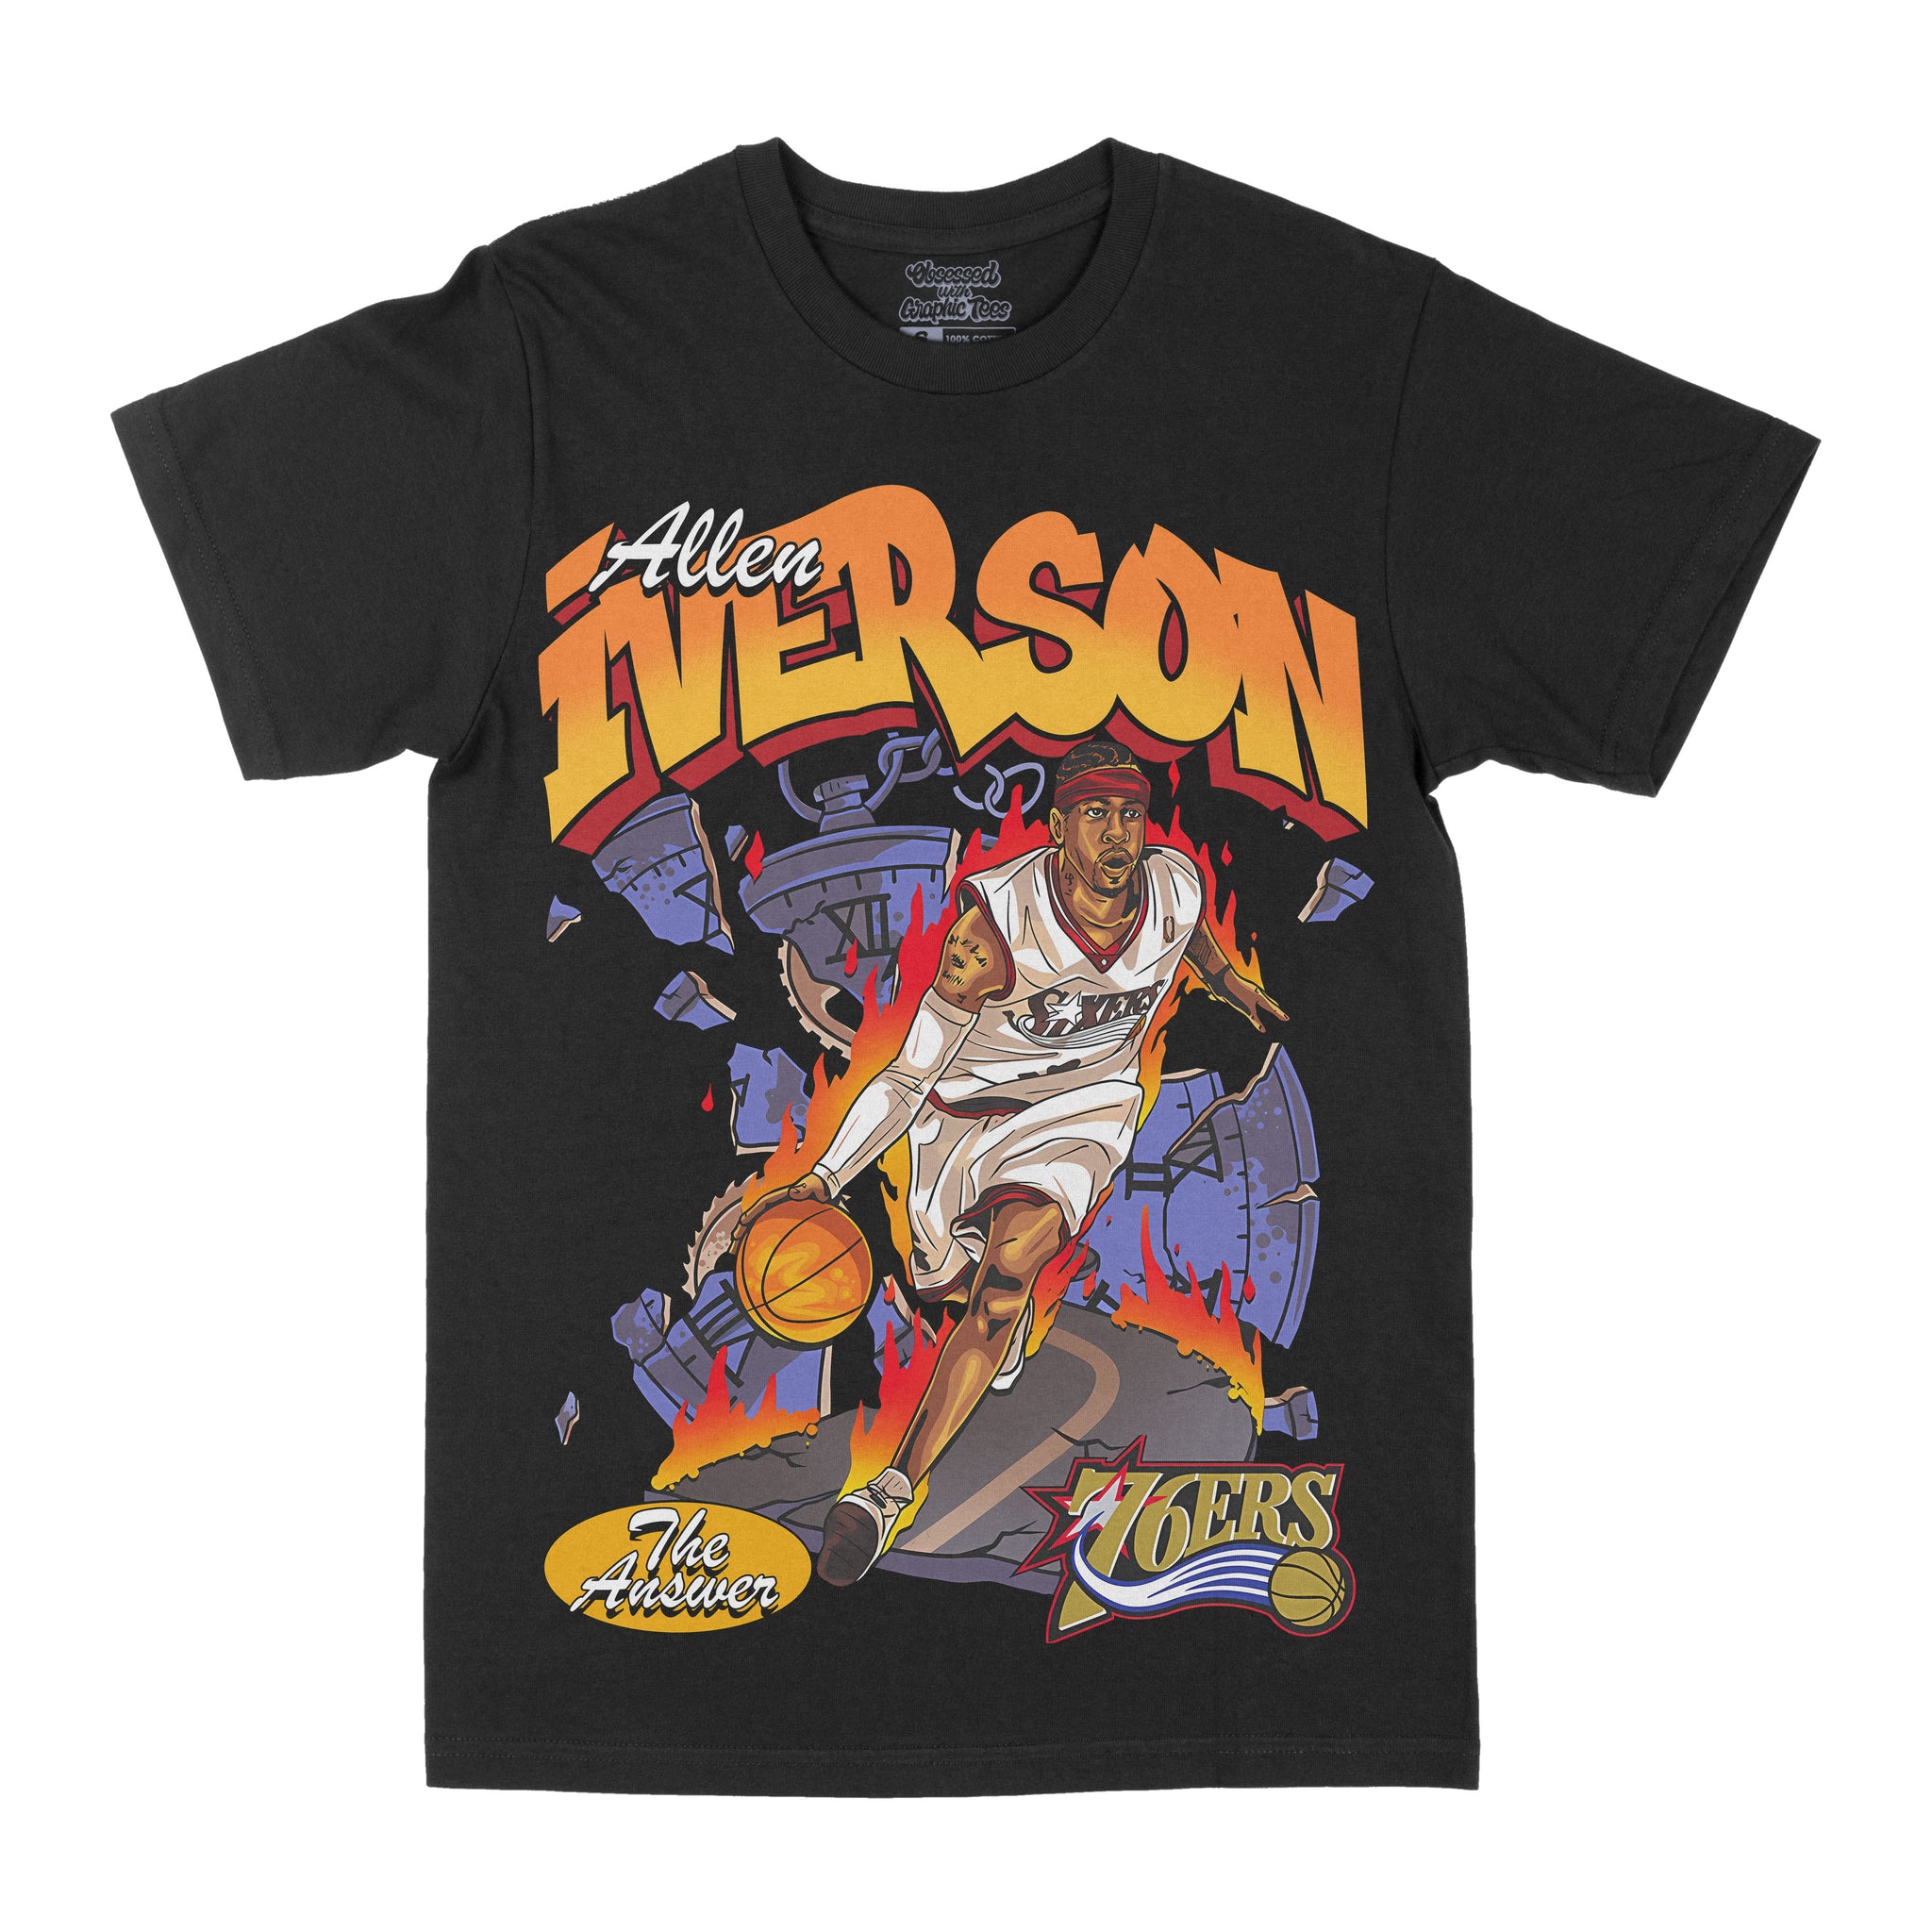 Allen Iverson "The Answer" Graphic Tee